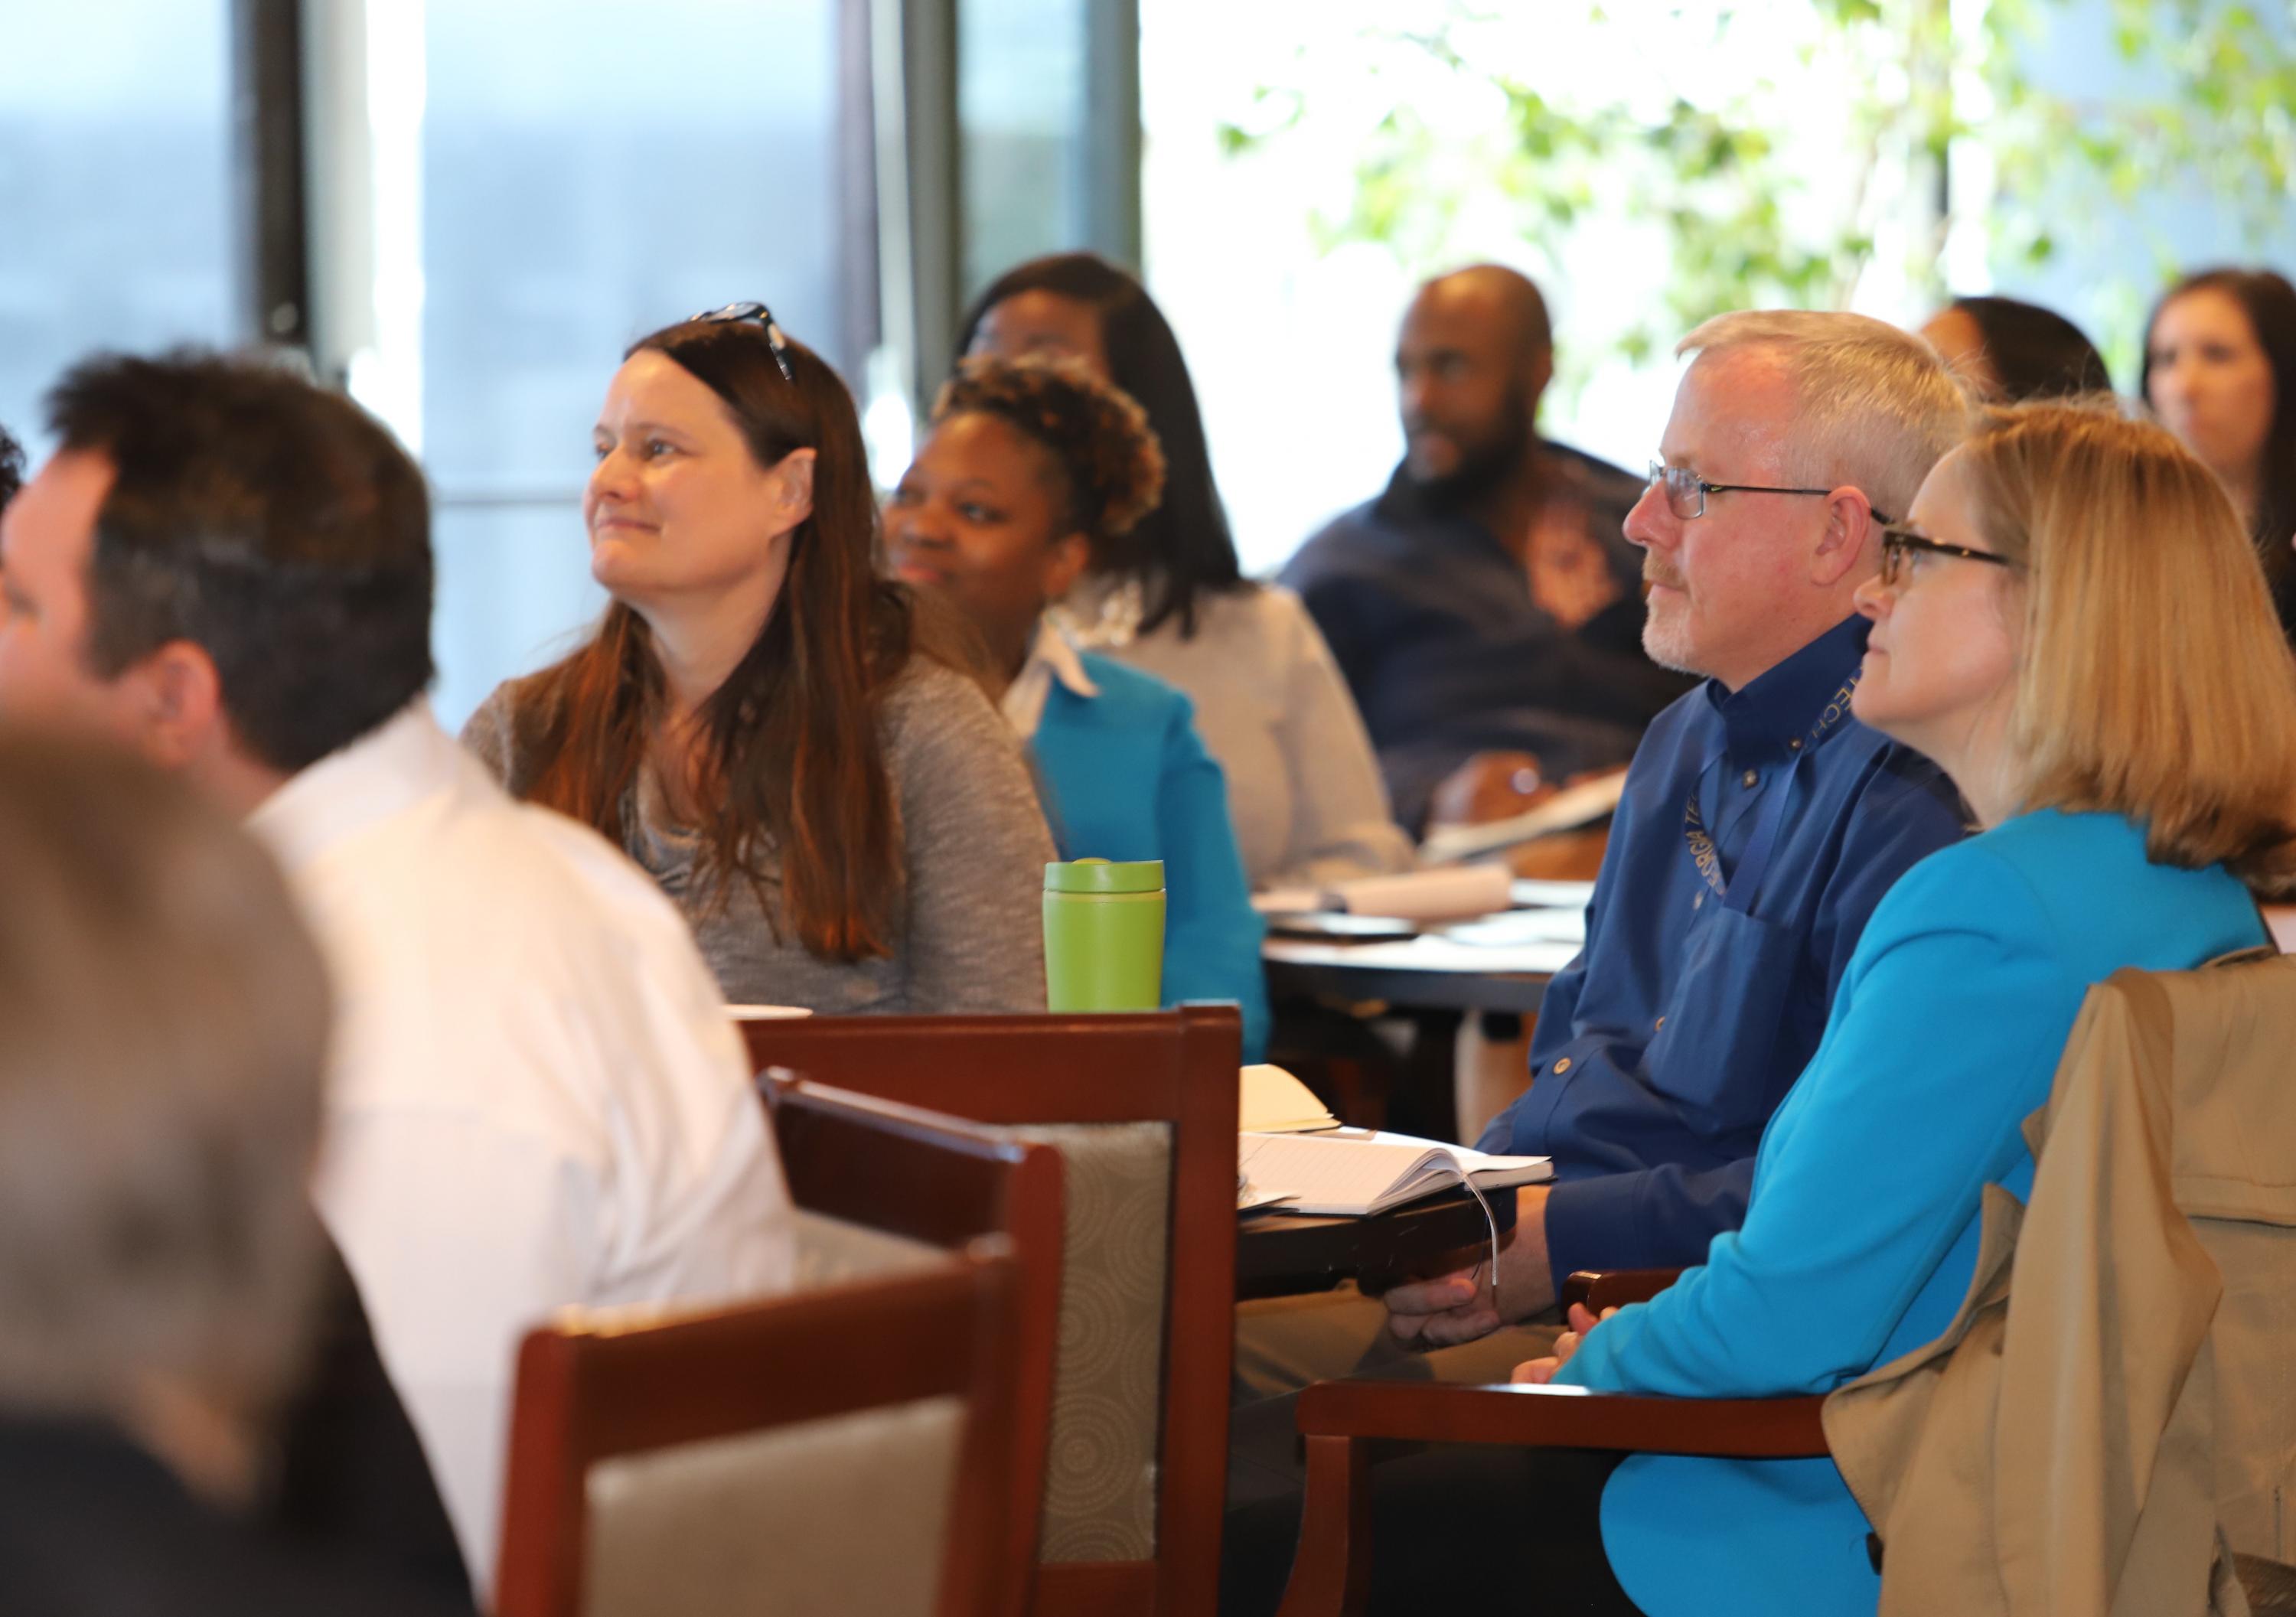 On February 6, the second cohort of 126 staff and faculty leaders participated in the Inclusive Leaders Academy kickoff to hear featured presenter Stephen Young discuss “MicroInequities: Managing Unconscious Bias.”